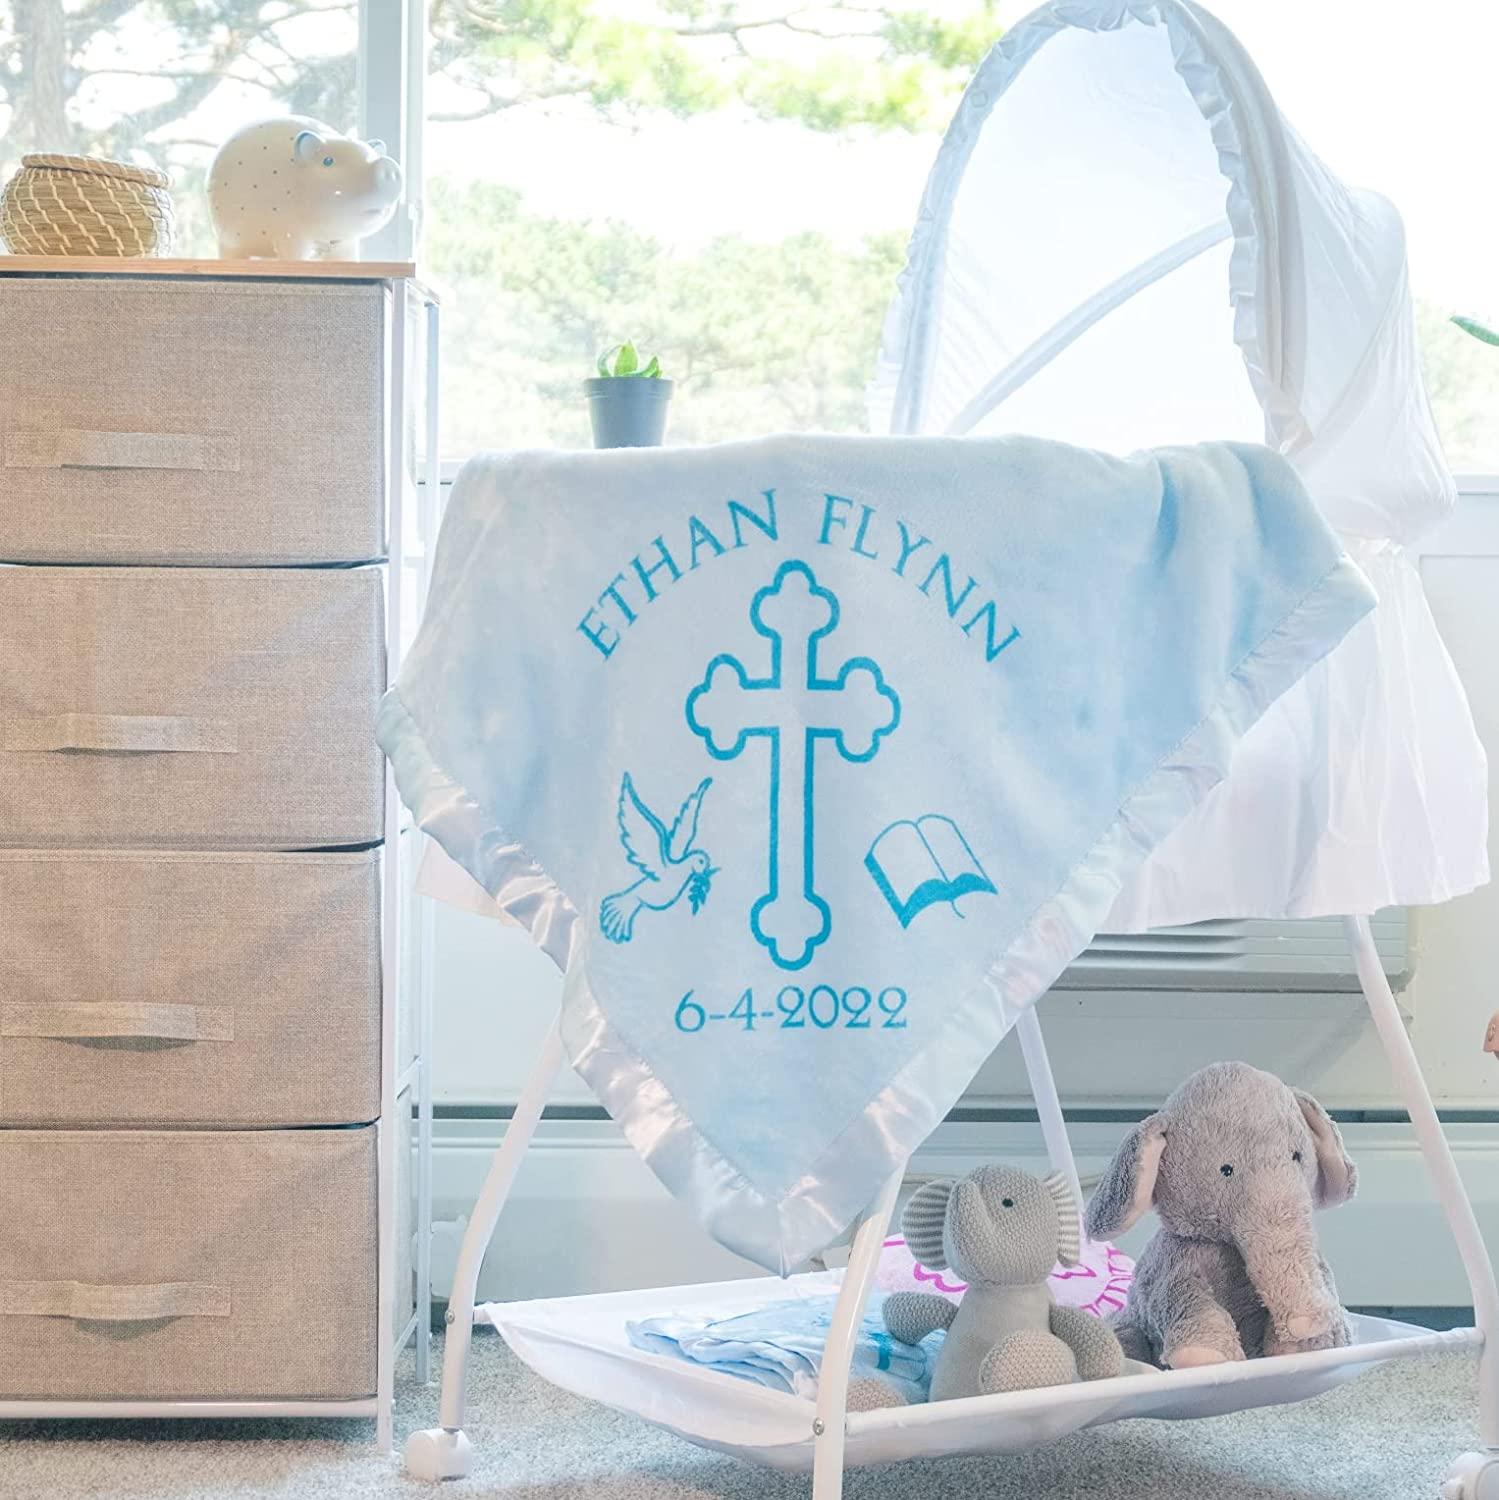 First Communion Gift for Boys - Personalized Prayer Box – inAWE